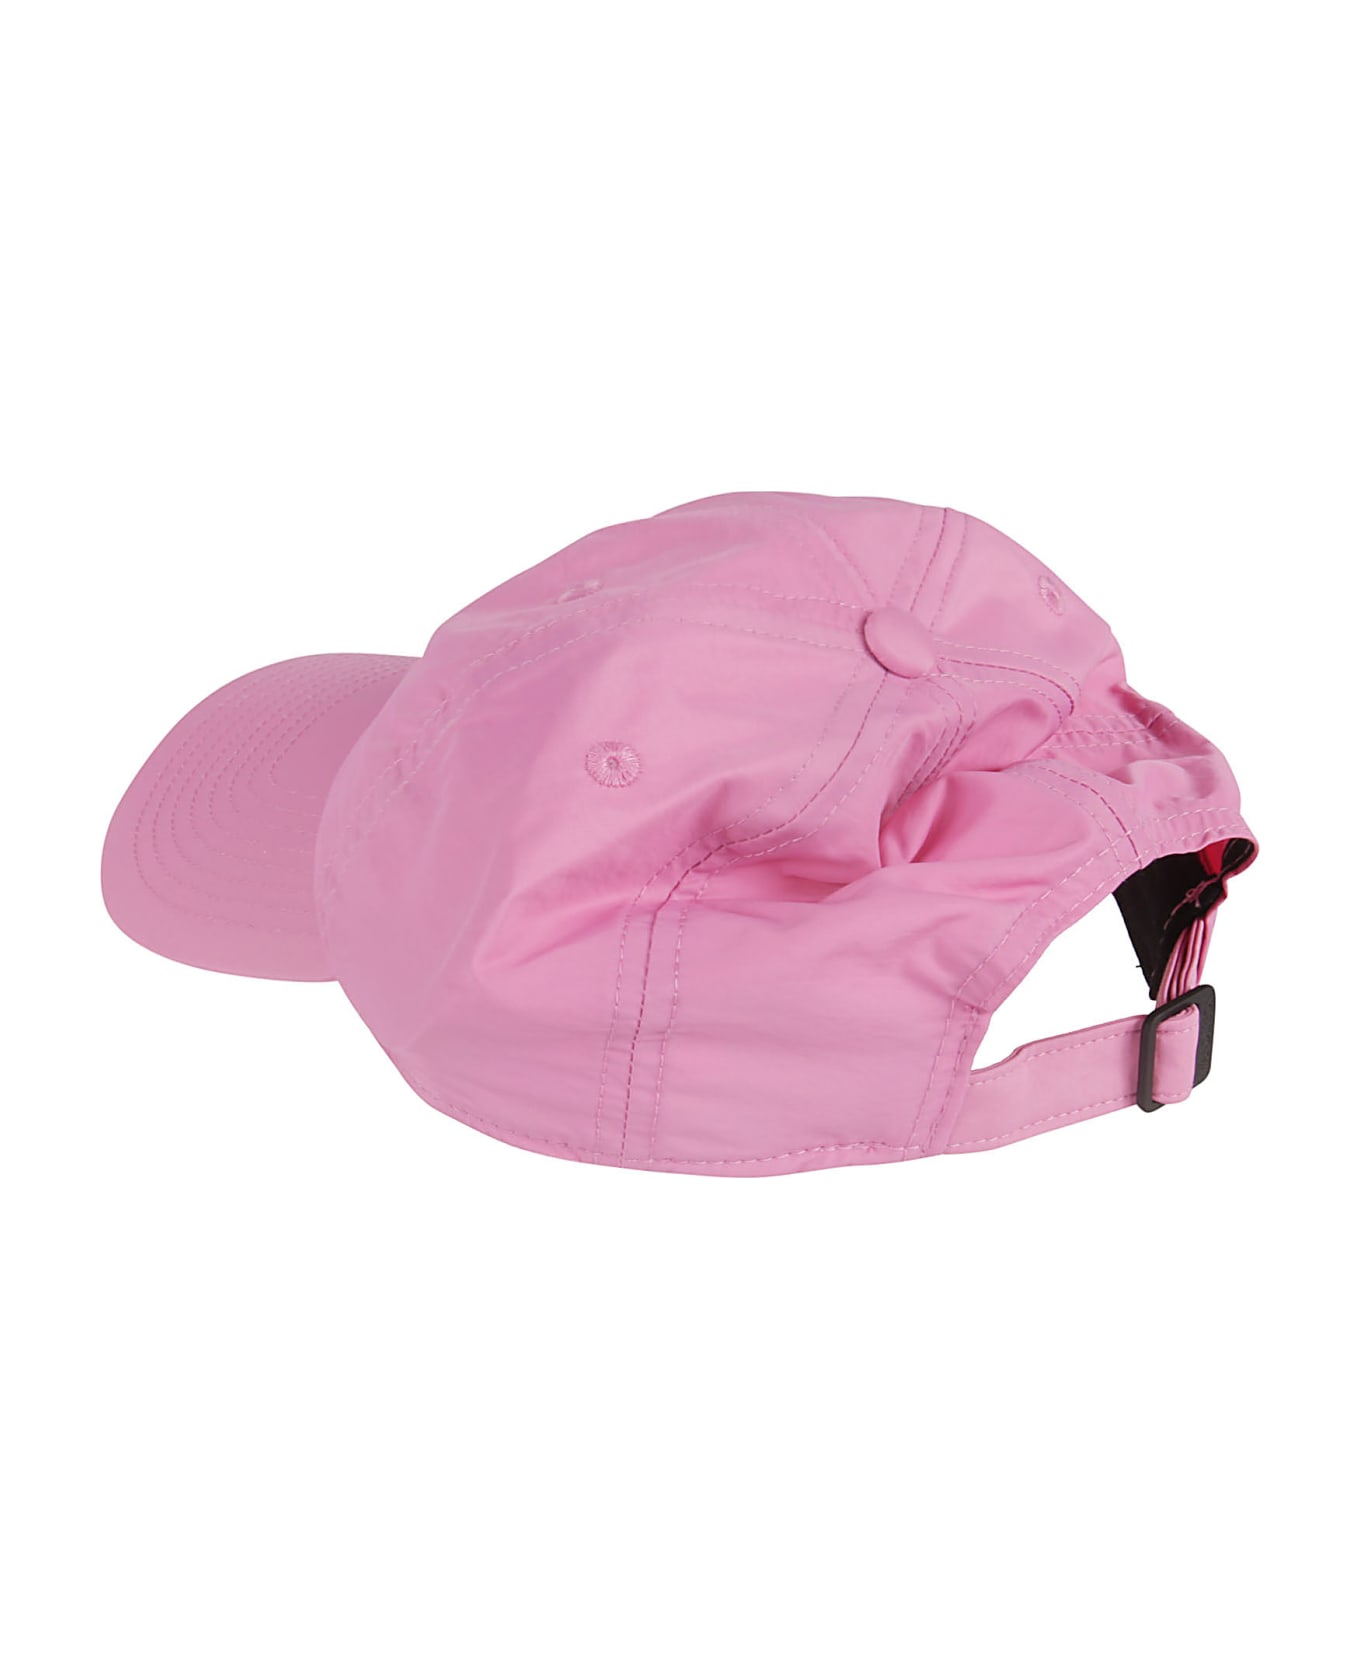 J.W. Anderson Logo Embroidered Baseball Cap - Pink